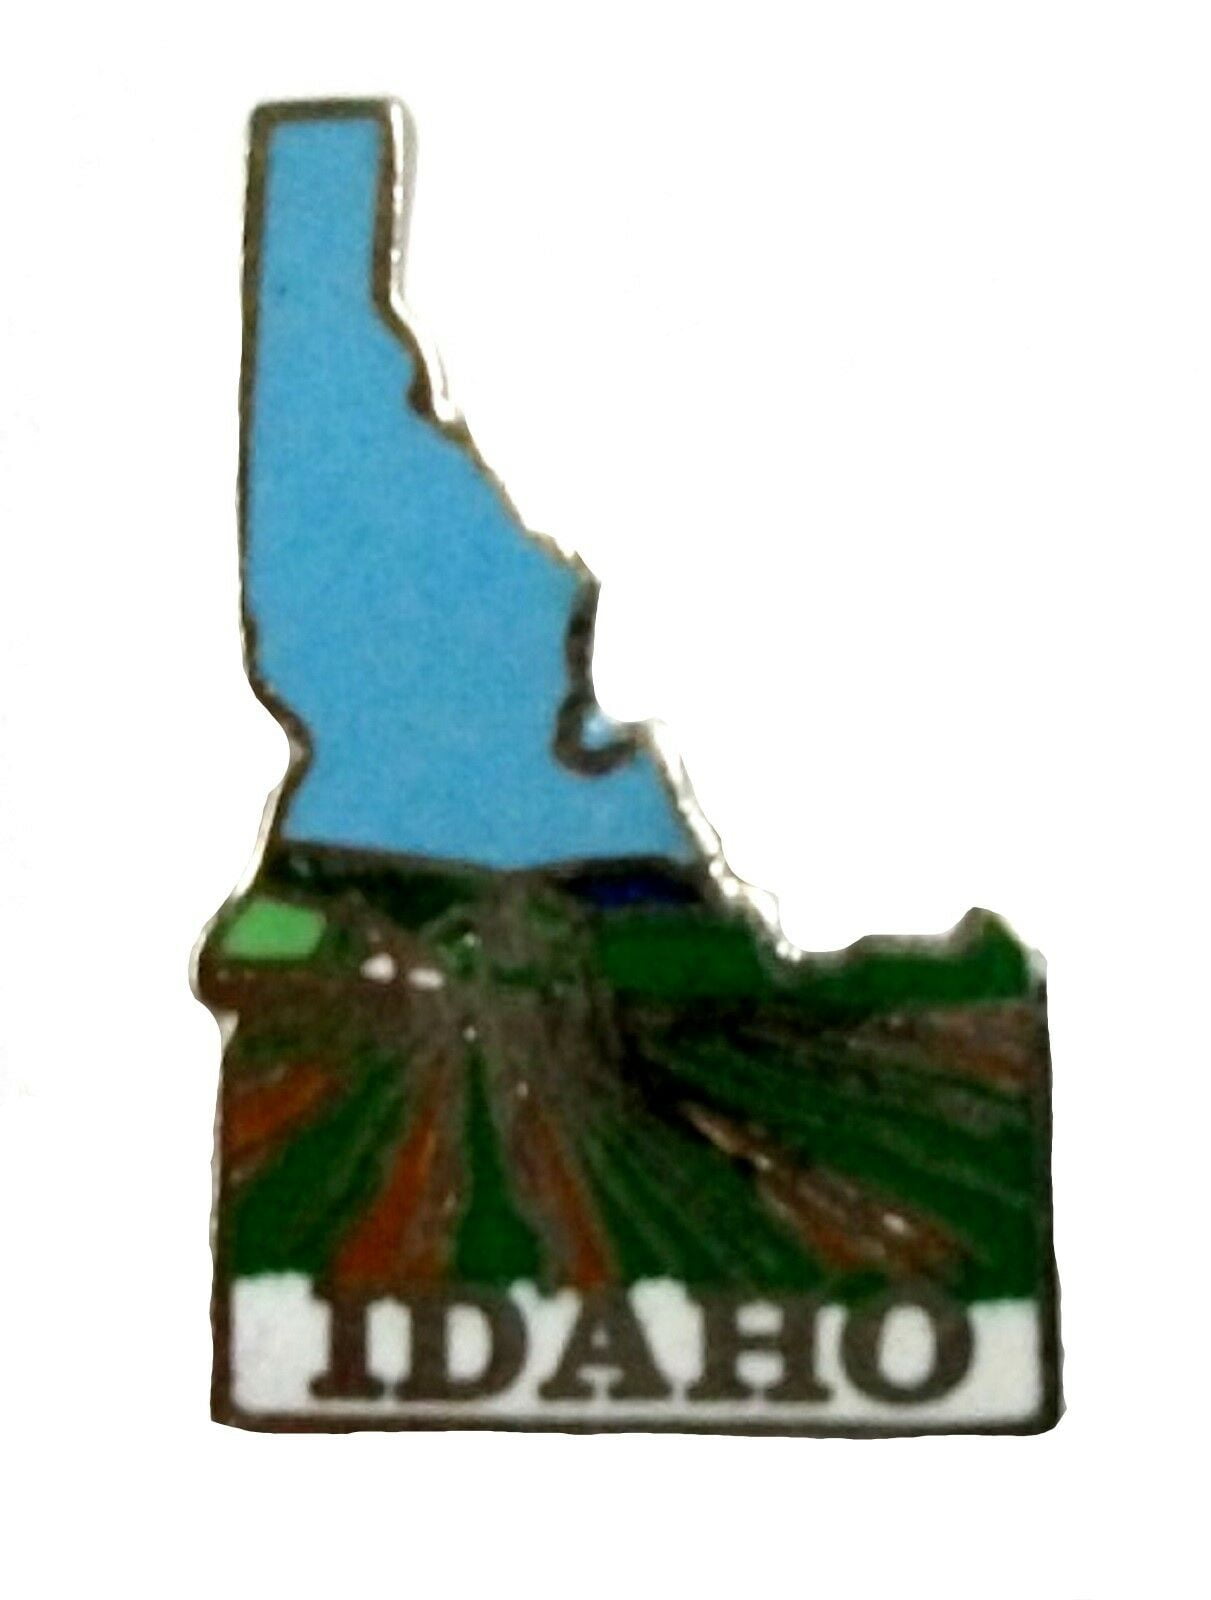 Idaho State Outline Hat Tac or Lapel Pin 